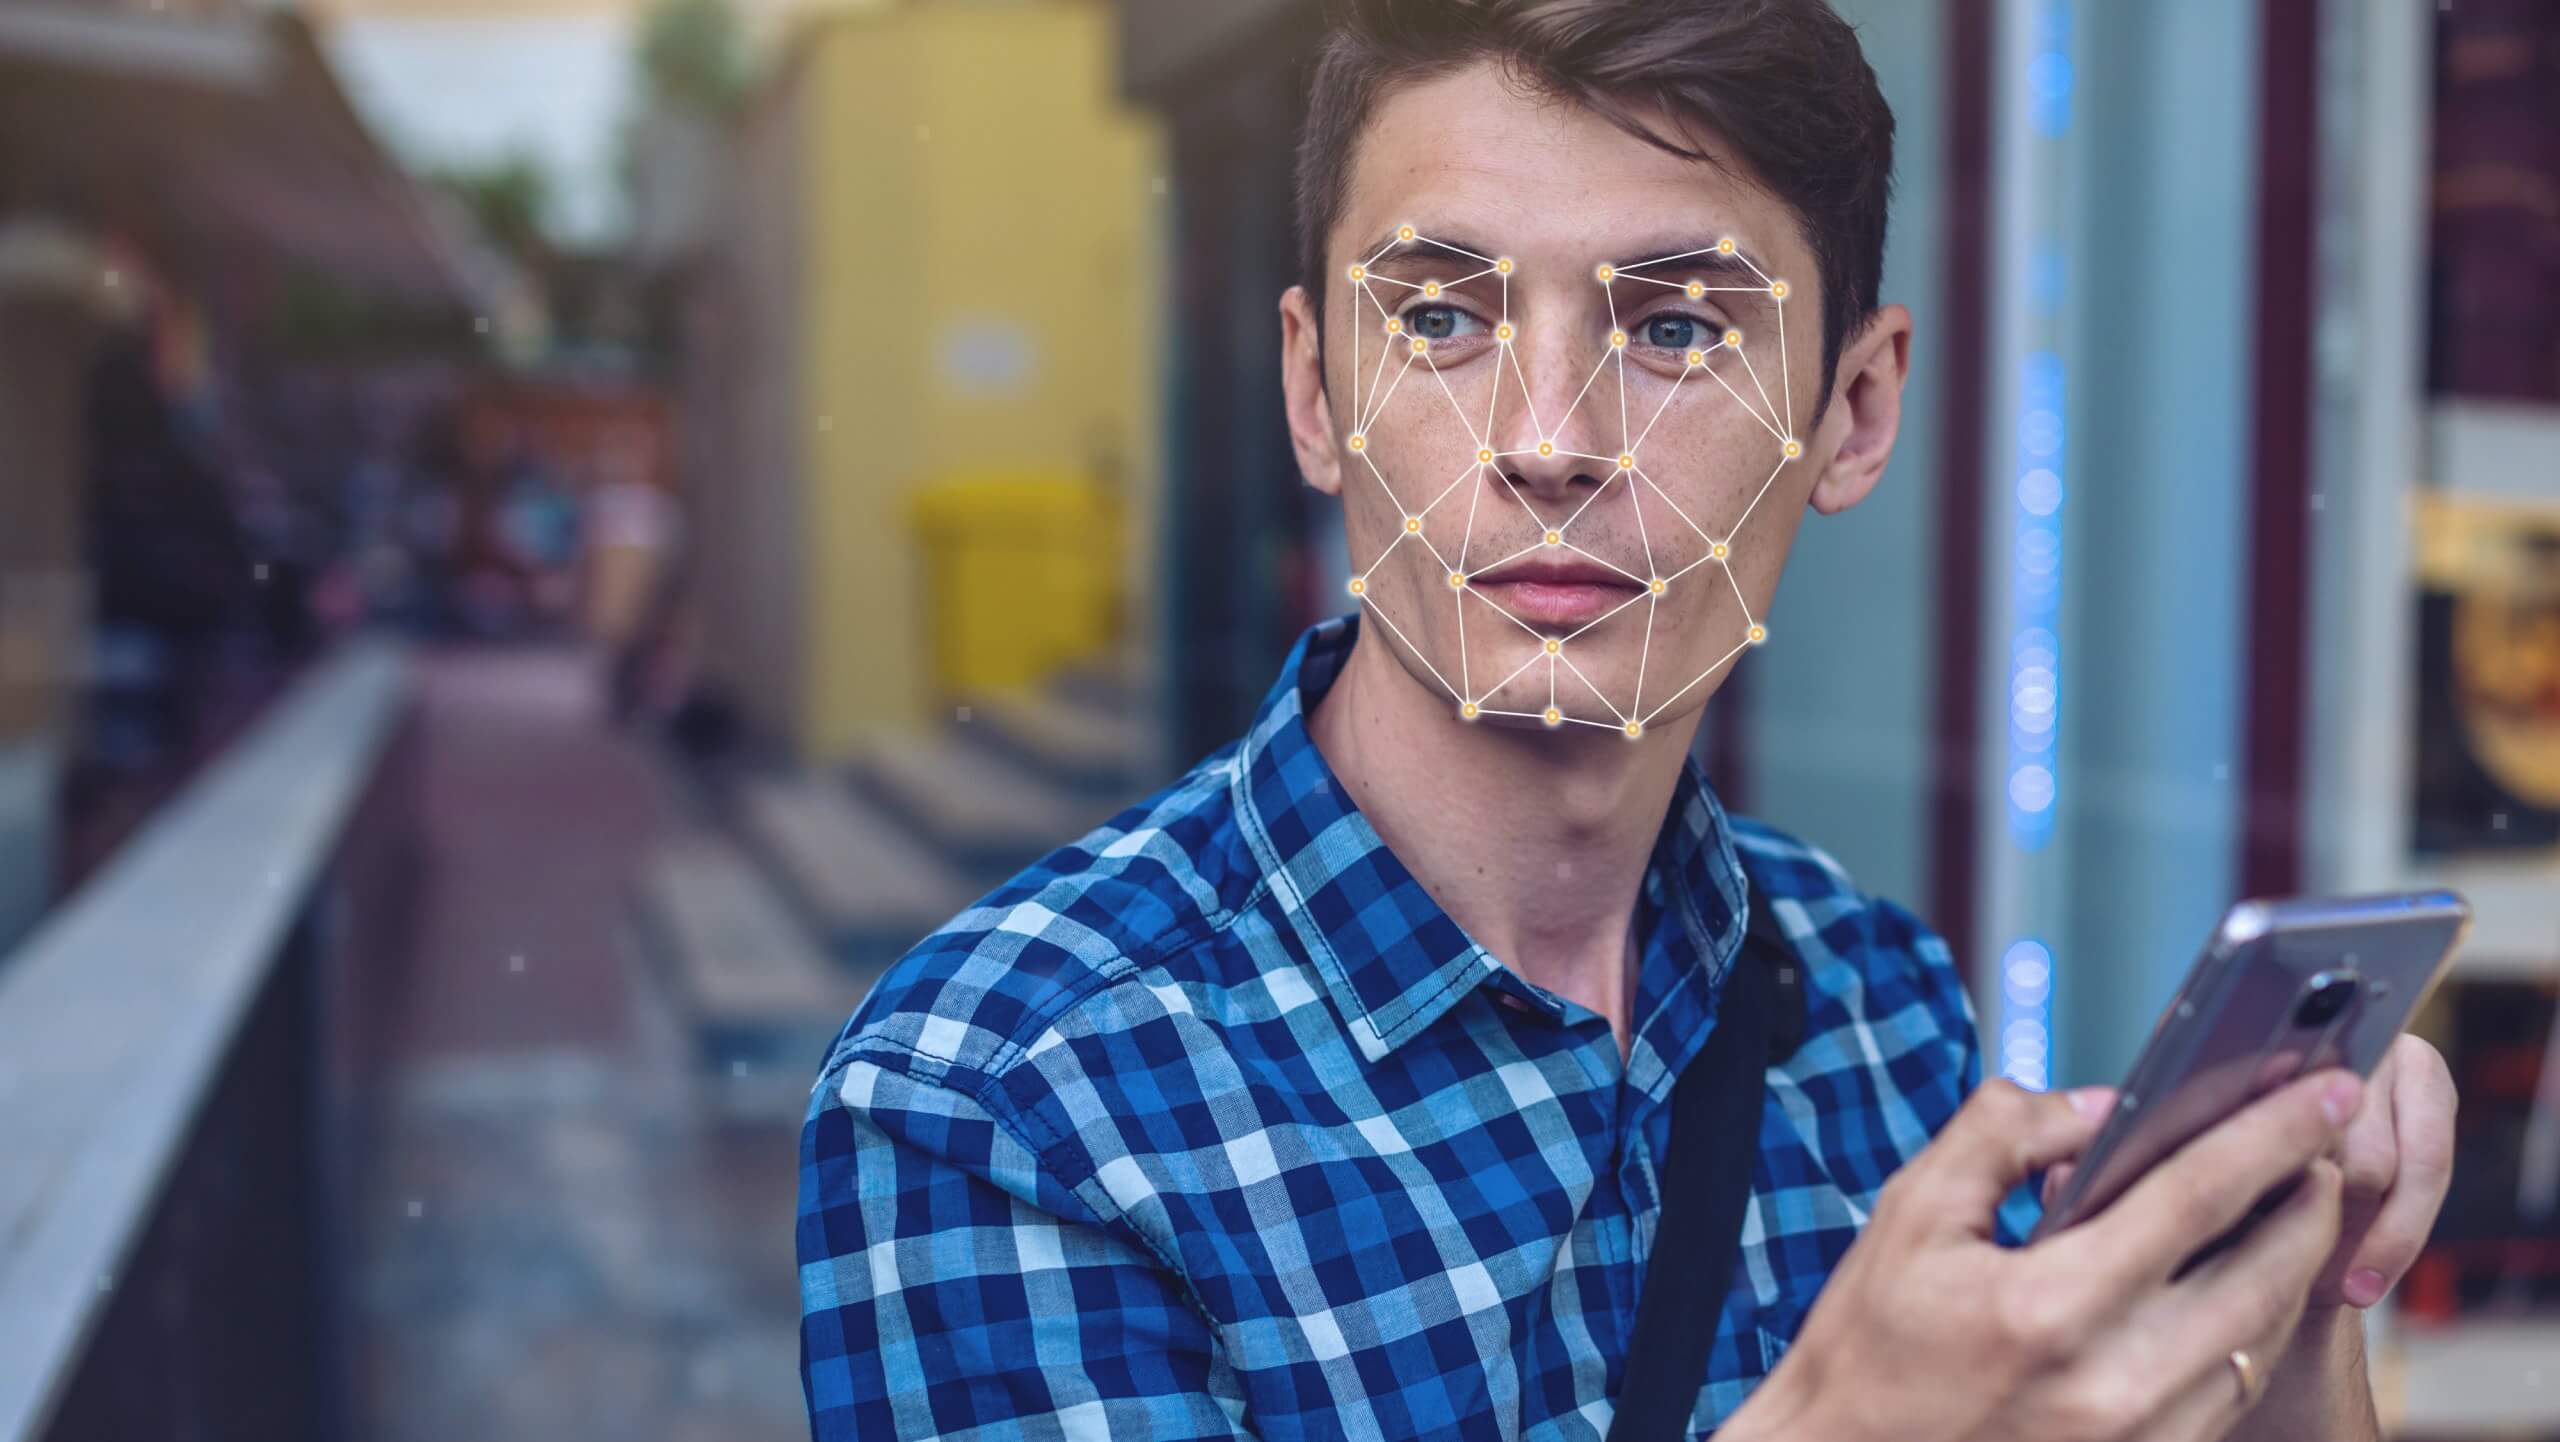 Photos unlock 40% of Android phones with face recognition